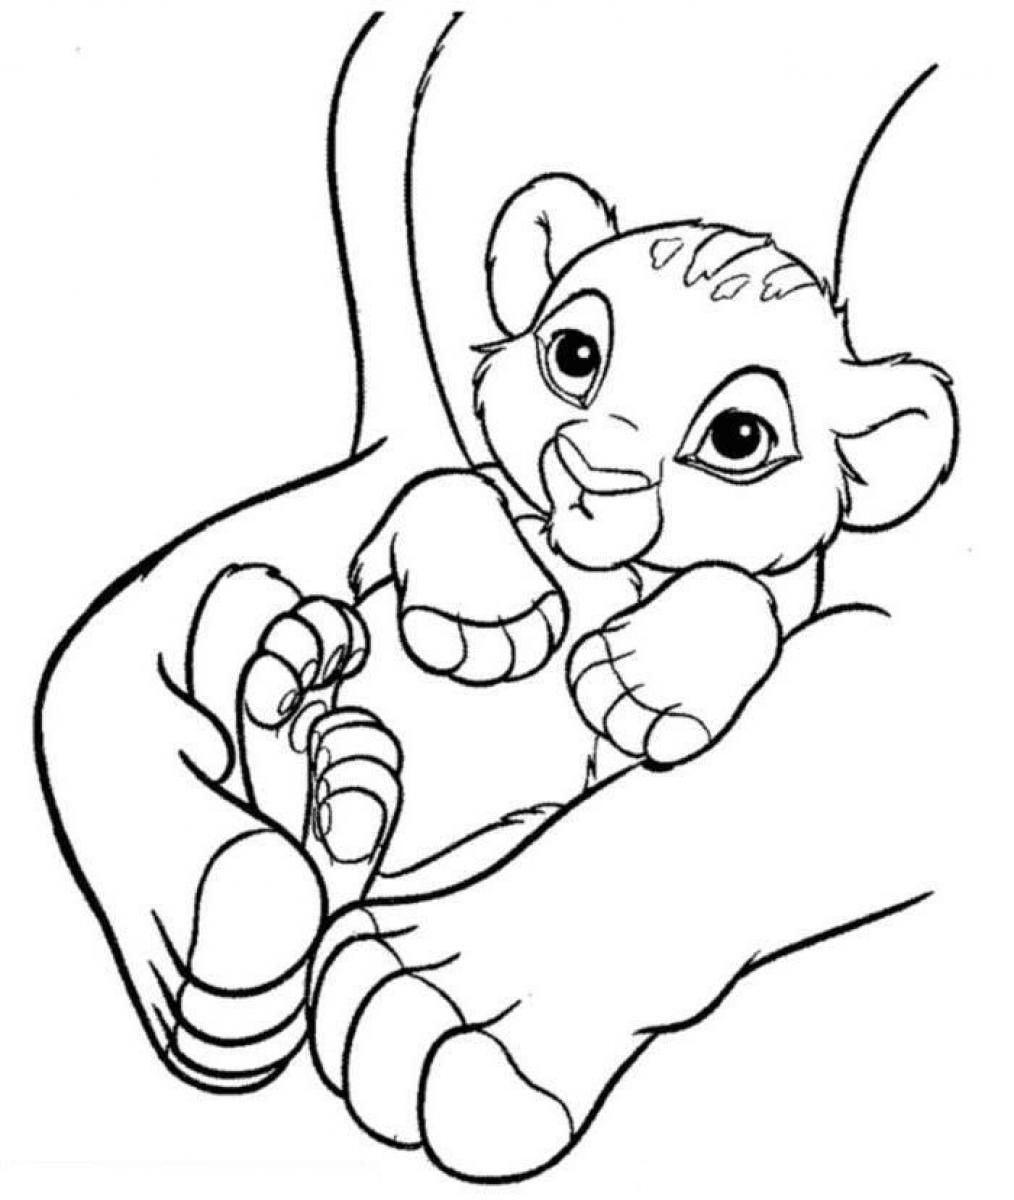 20+ Simba Coloring Page Pictures